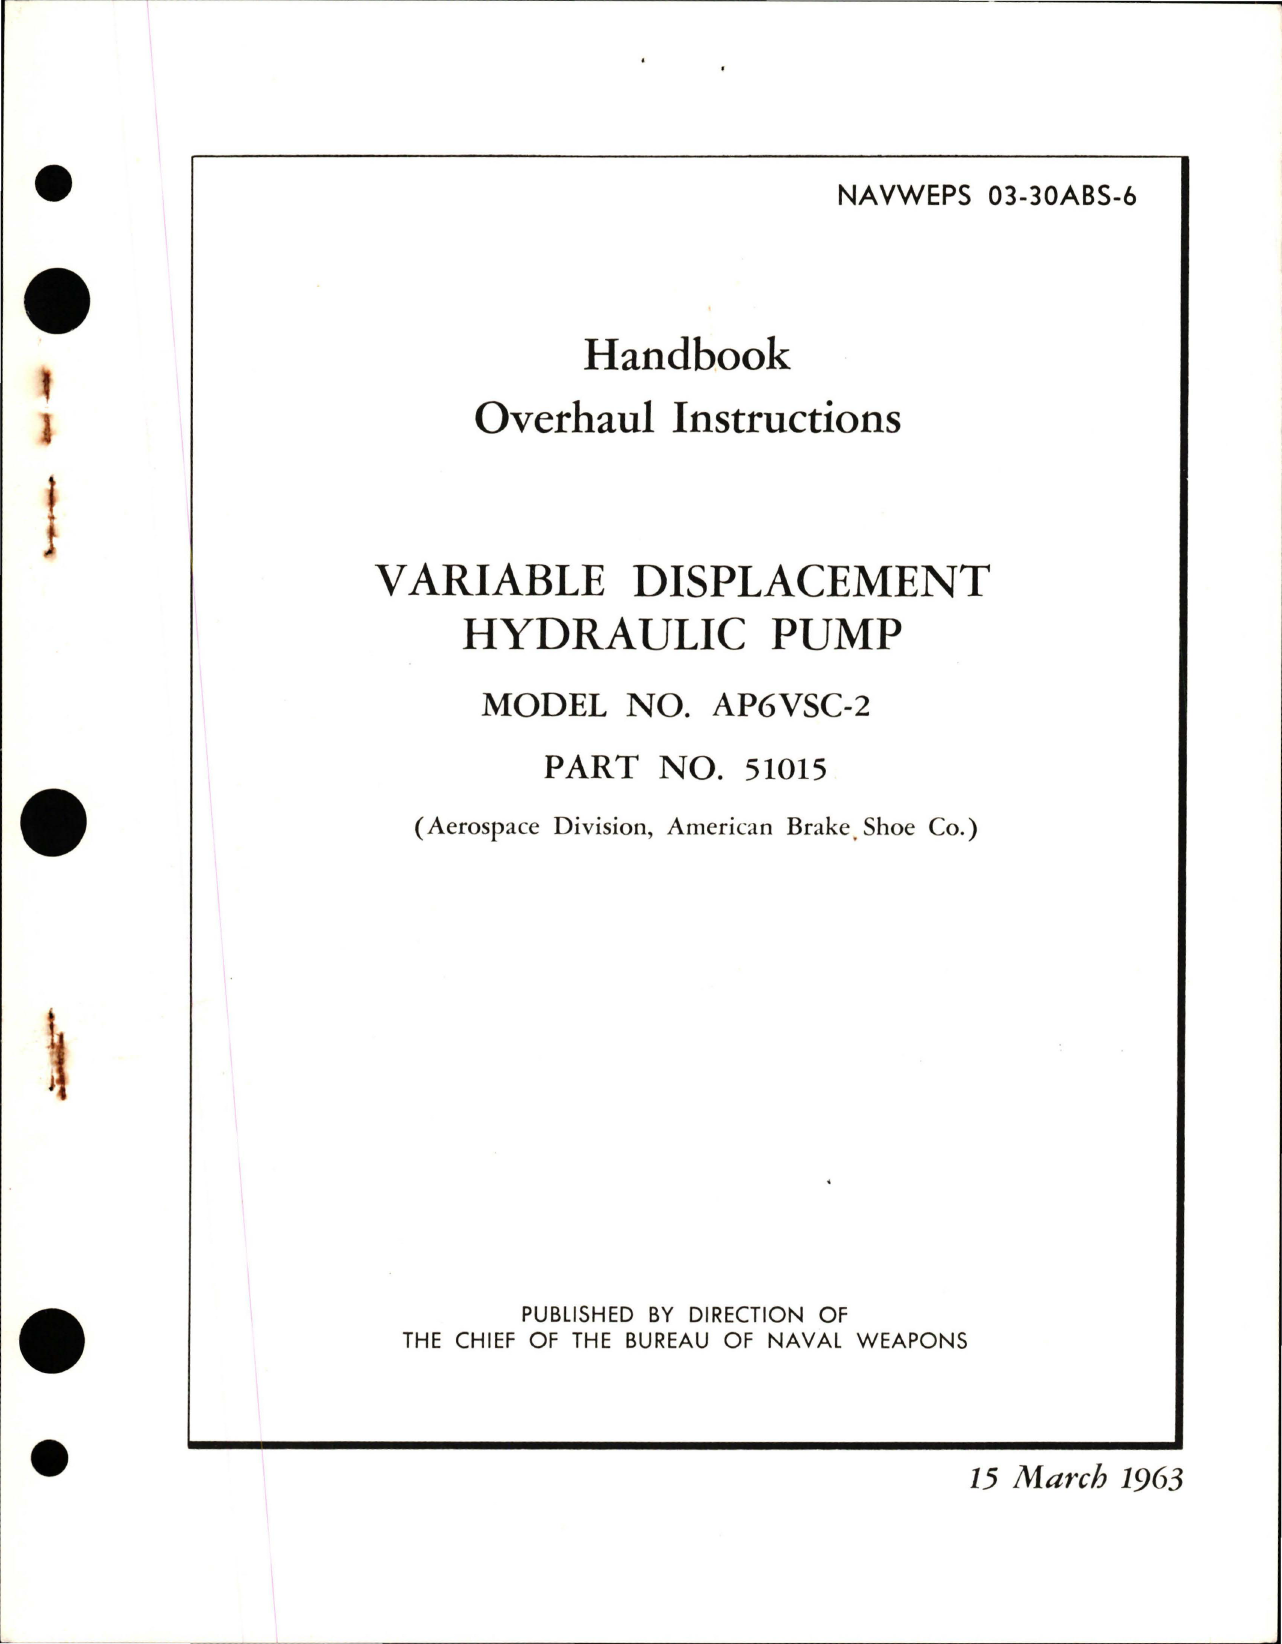 Sample page 1 from AirCorps Library document: Overhaul Instructions for Variable Displacement Hydraulic Pump - Model AP6VSC-2 - Part 51015